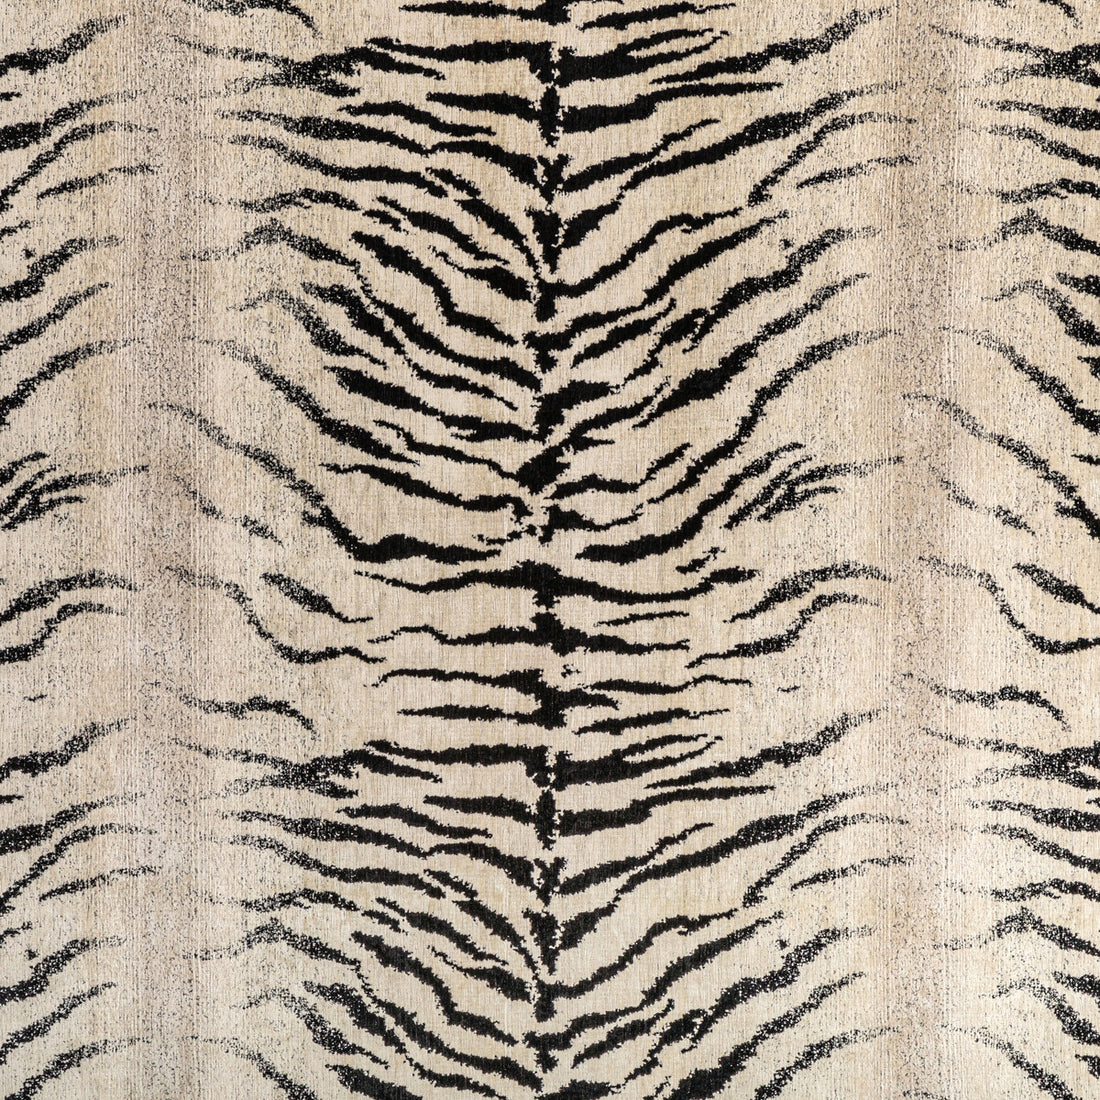 Provocative fabric in onyx color - pattern 36357.81.0 - by Kravet Couture in the Corey Damen Jenkins Trad Nouveau collection